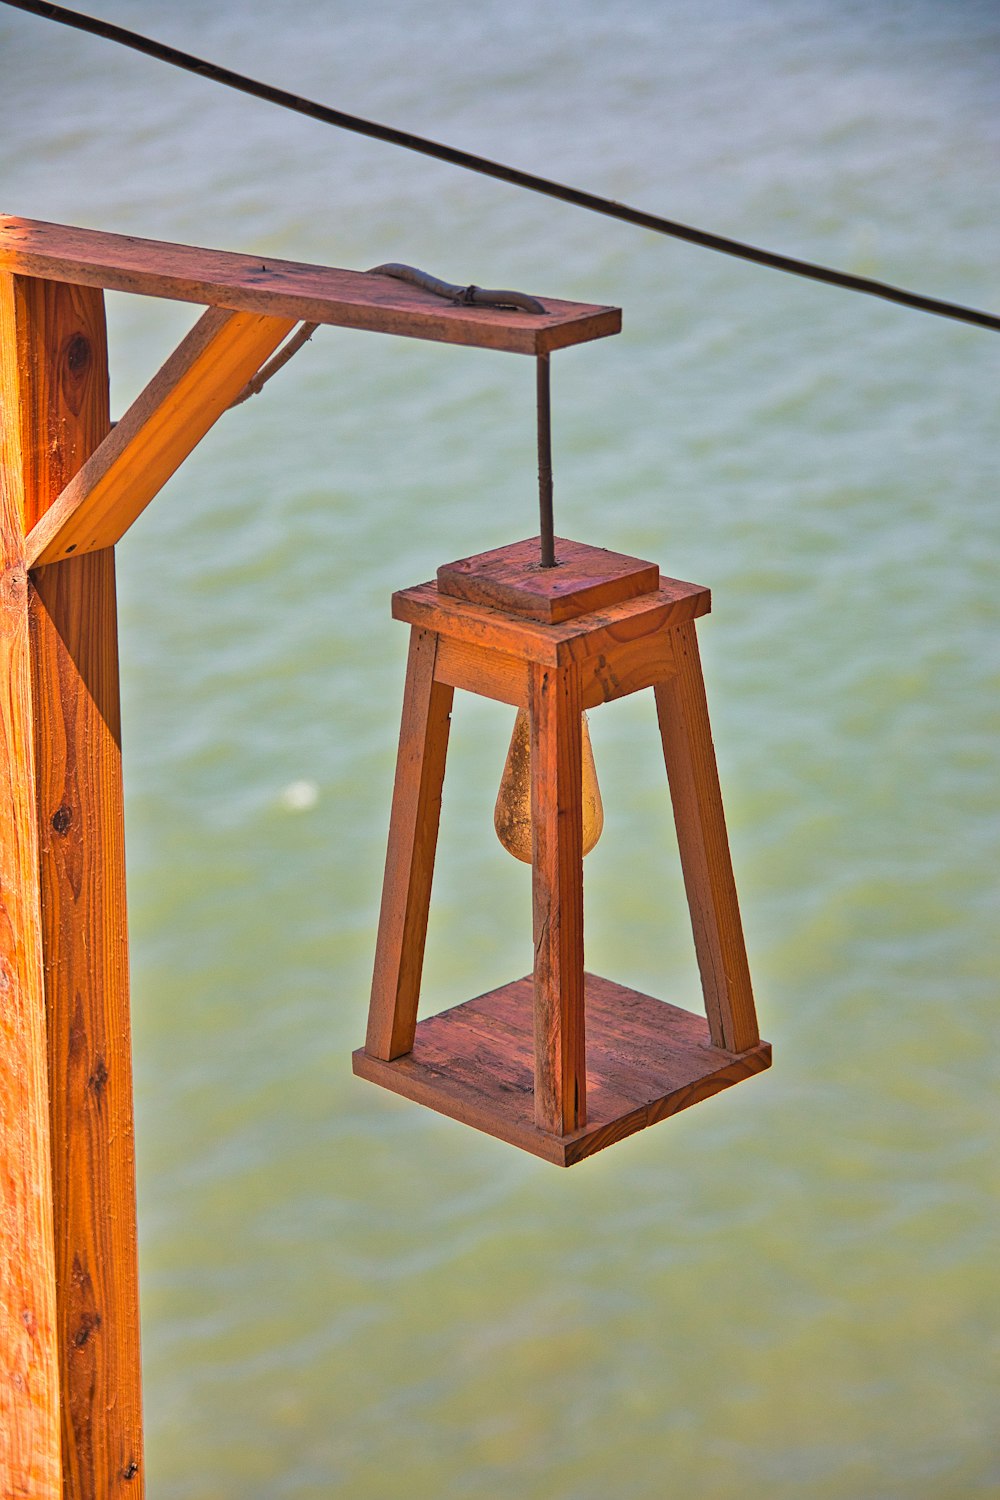 a wooden lantern hanging from a rope over a body of water